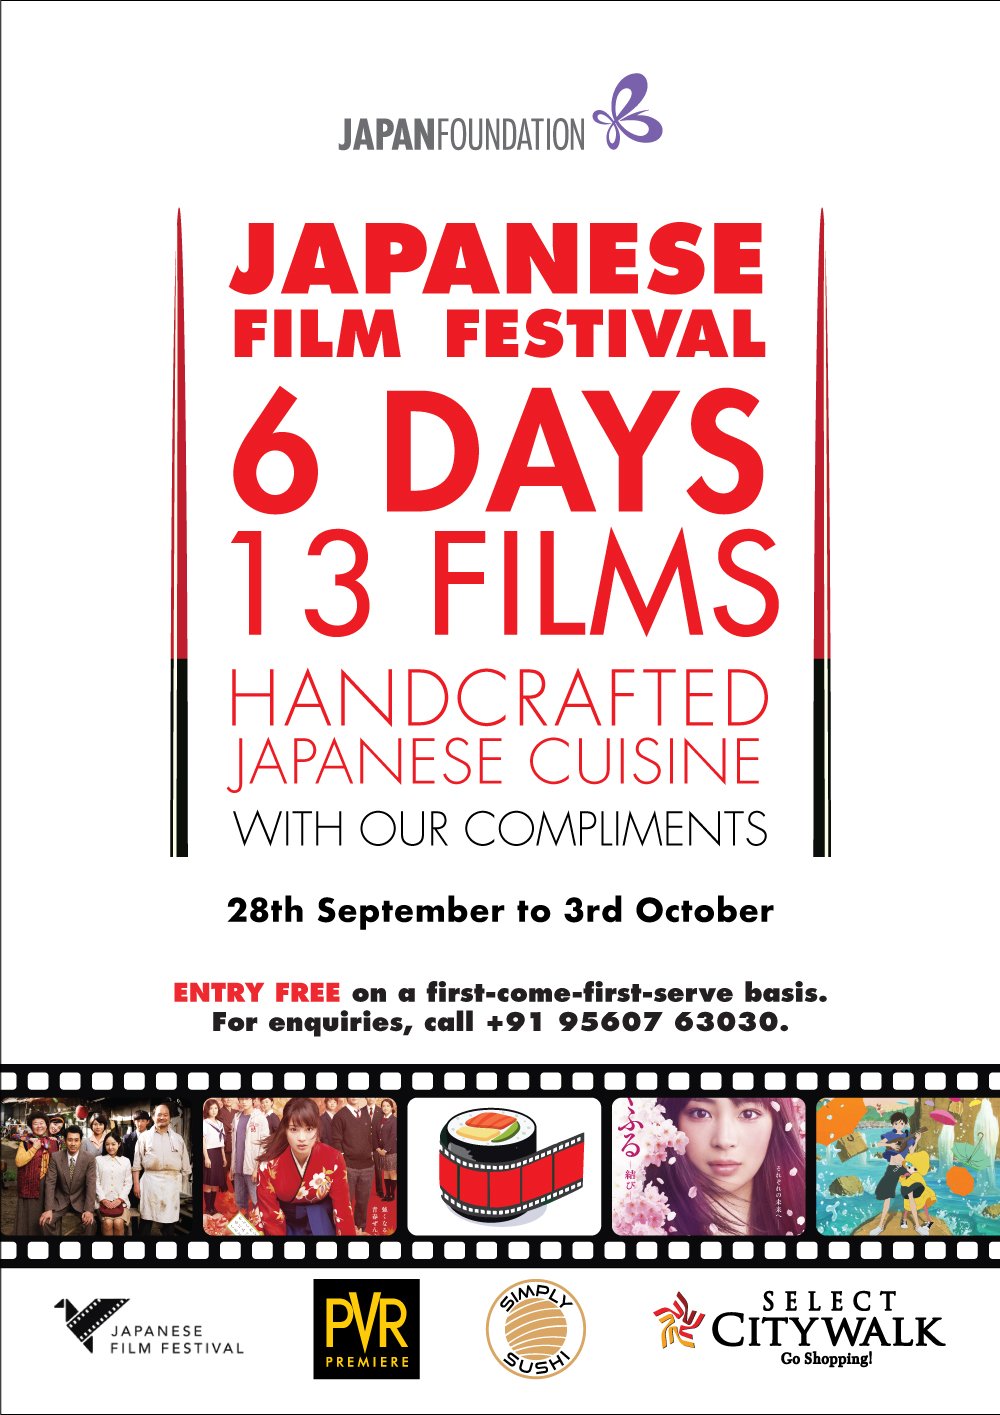 Here Is Why You Ve Got To Attend This Japanese Film Festival DforDelhi